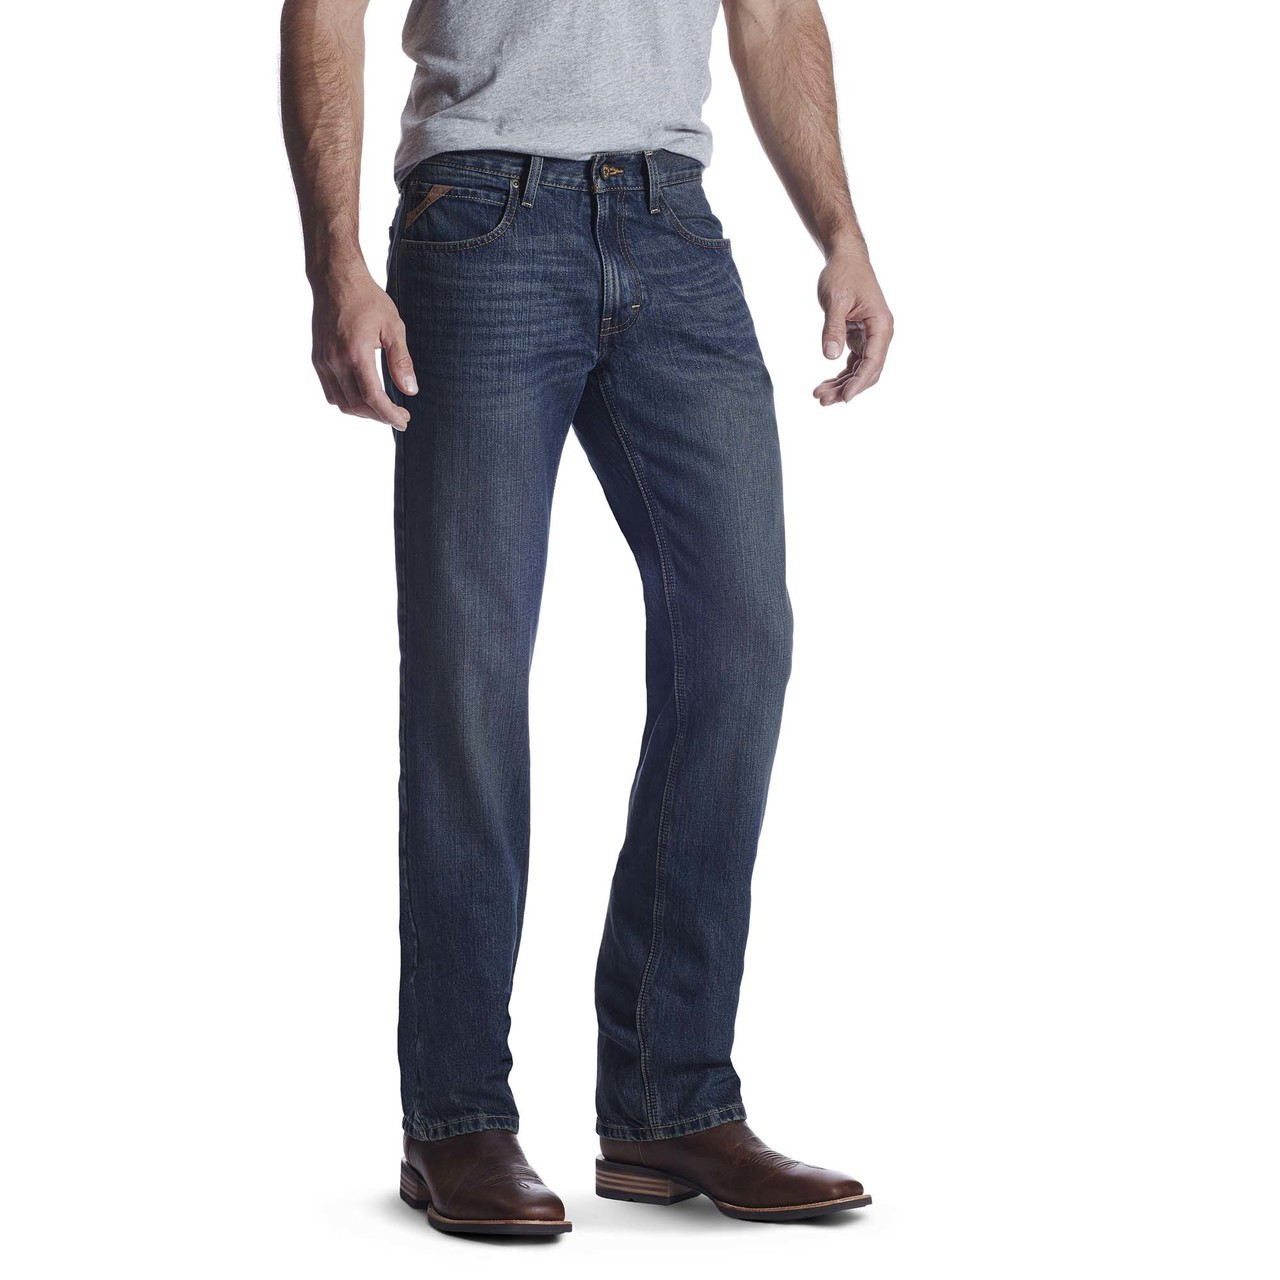 Ariat Men's Jeans - M5 Slim Fit Low Rise Straight Leg - Swagger - Billy ...